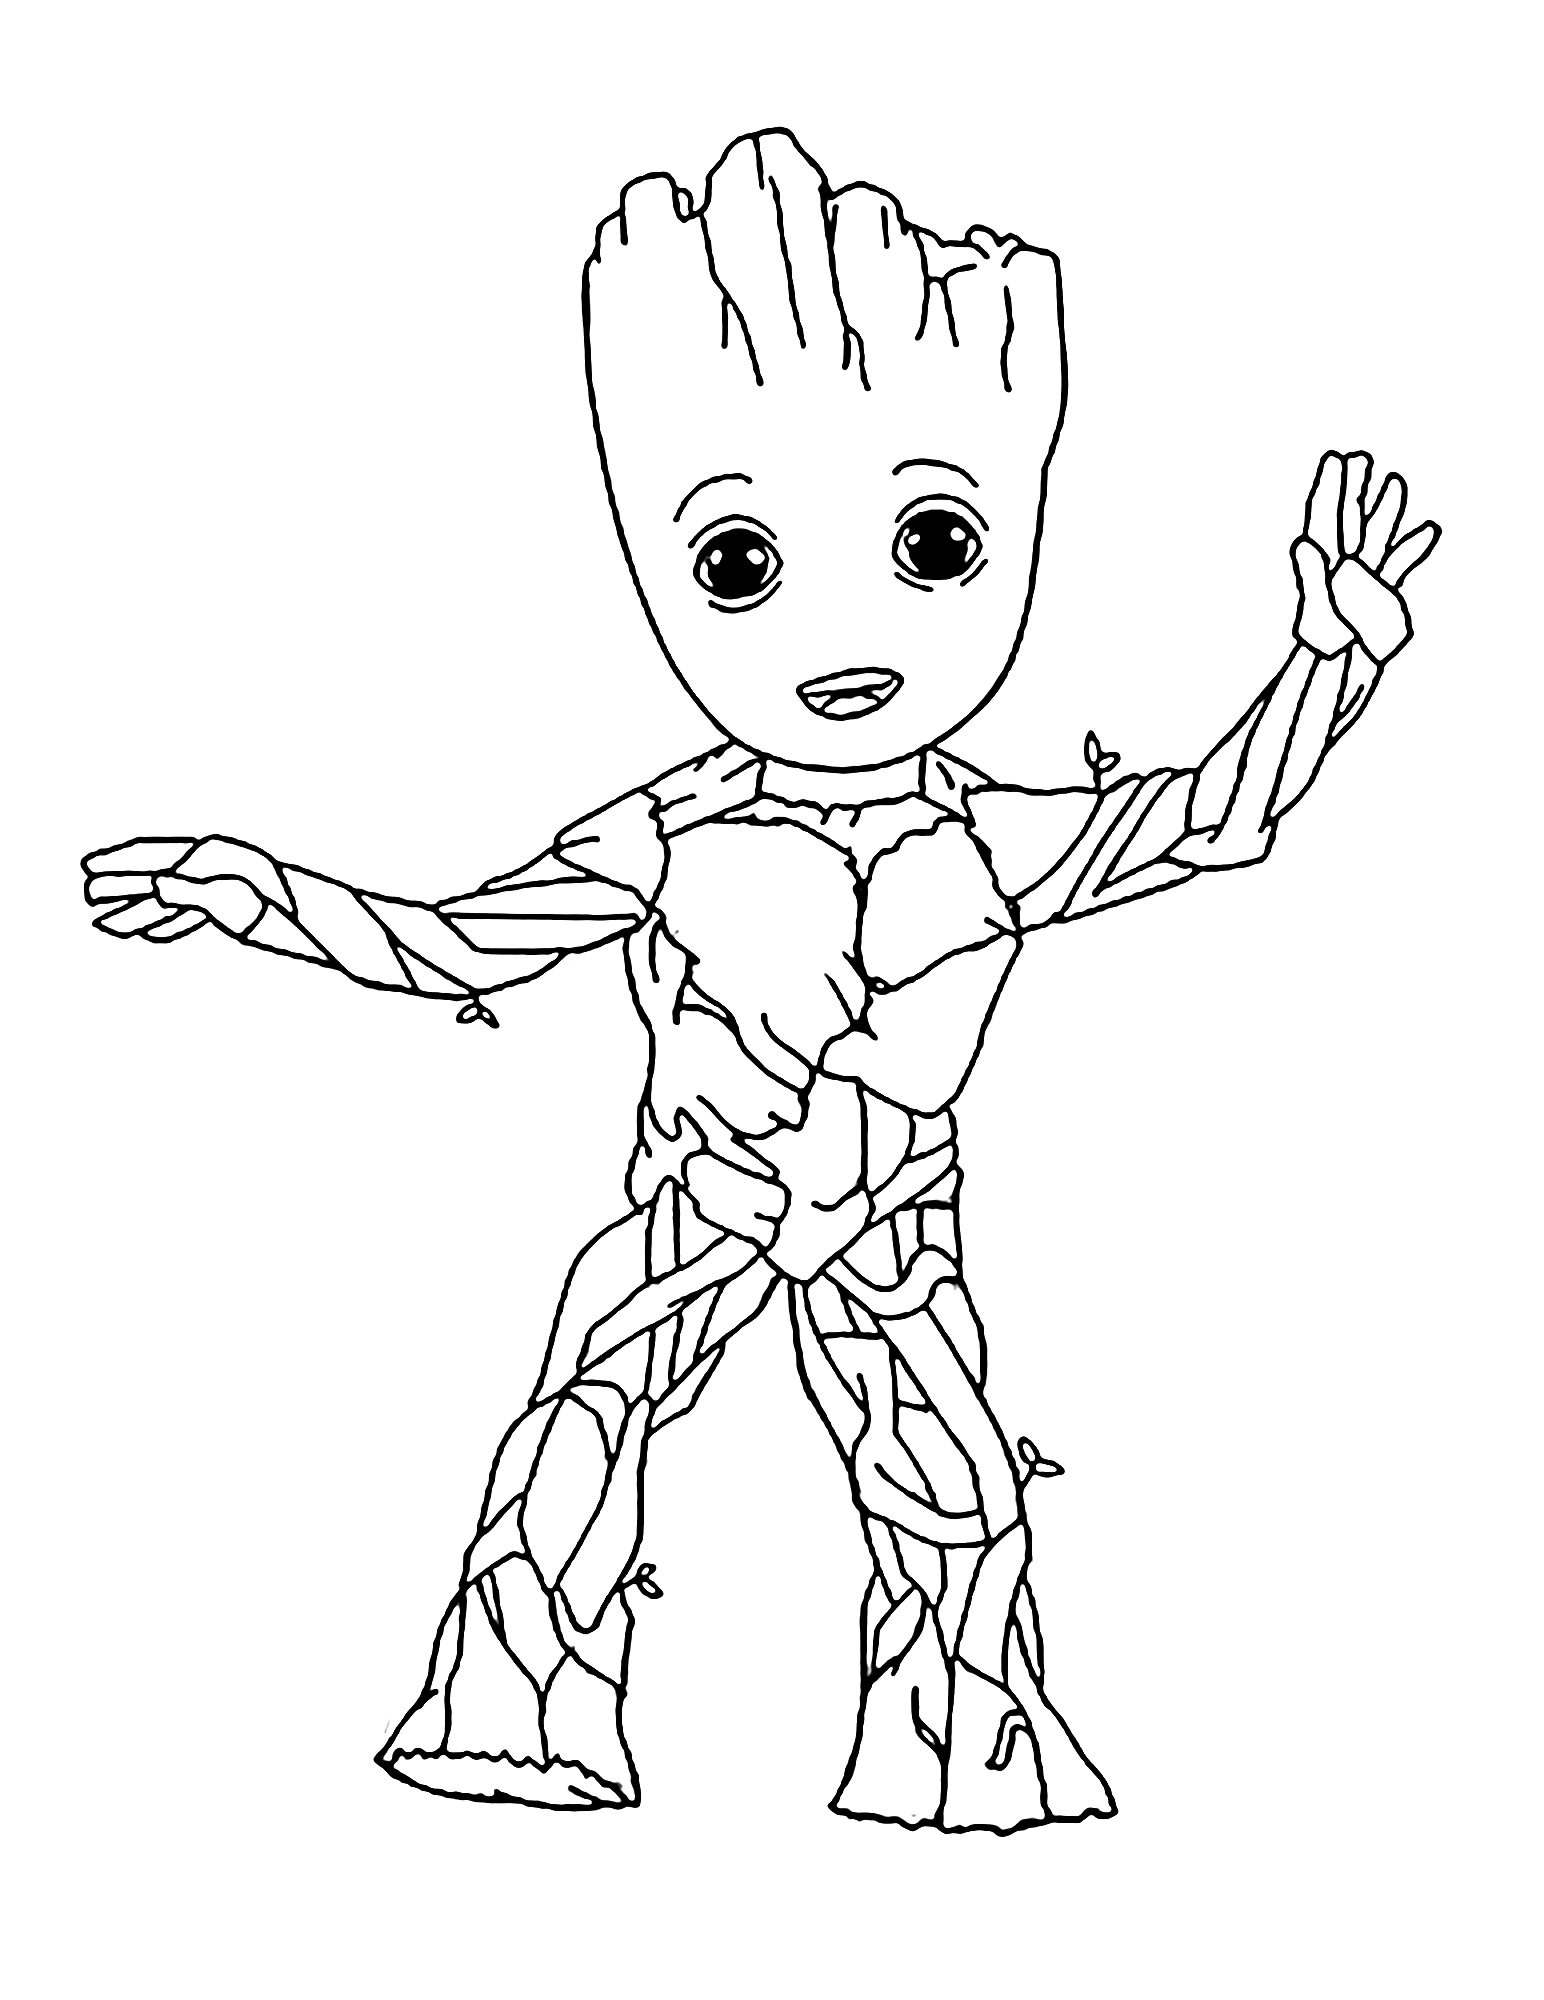 Baby Groot Coloring Pages   Coloring Home